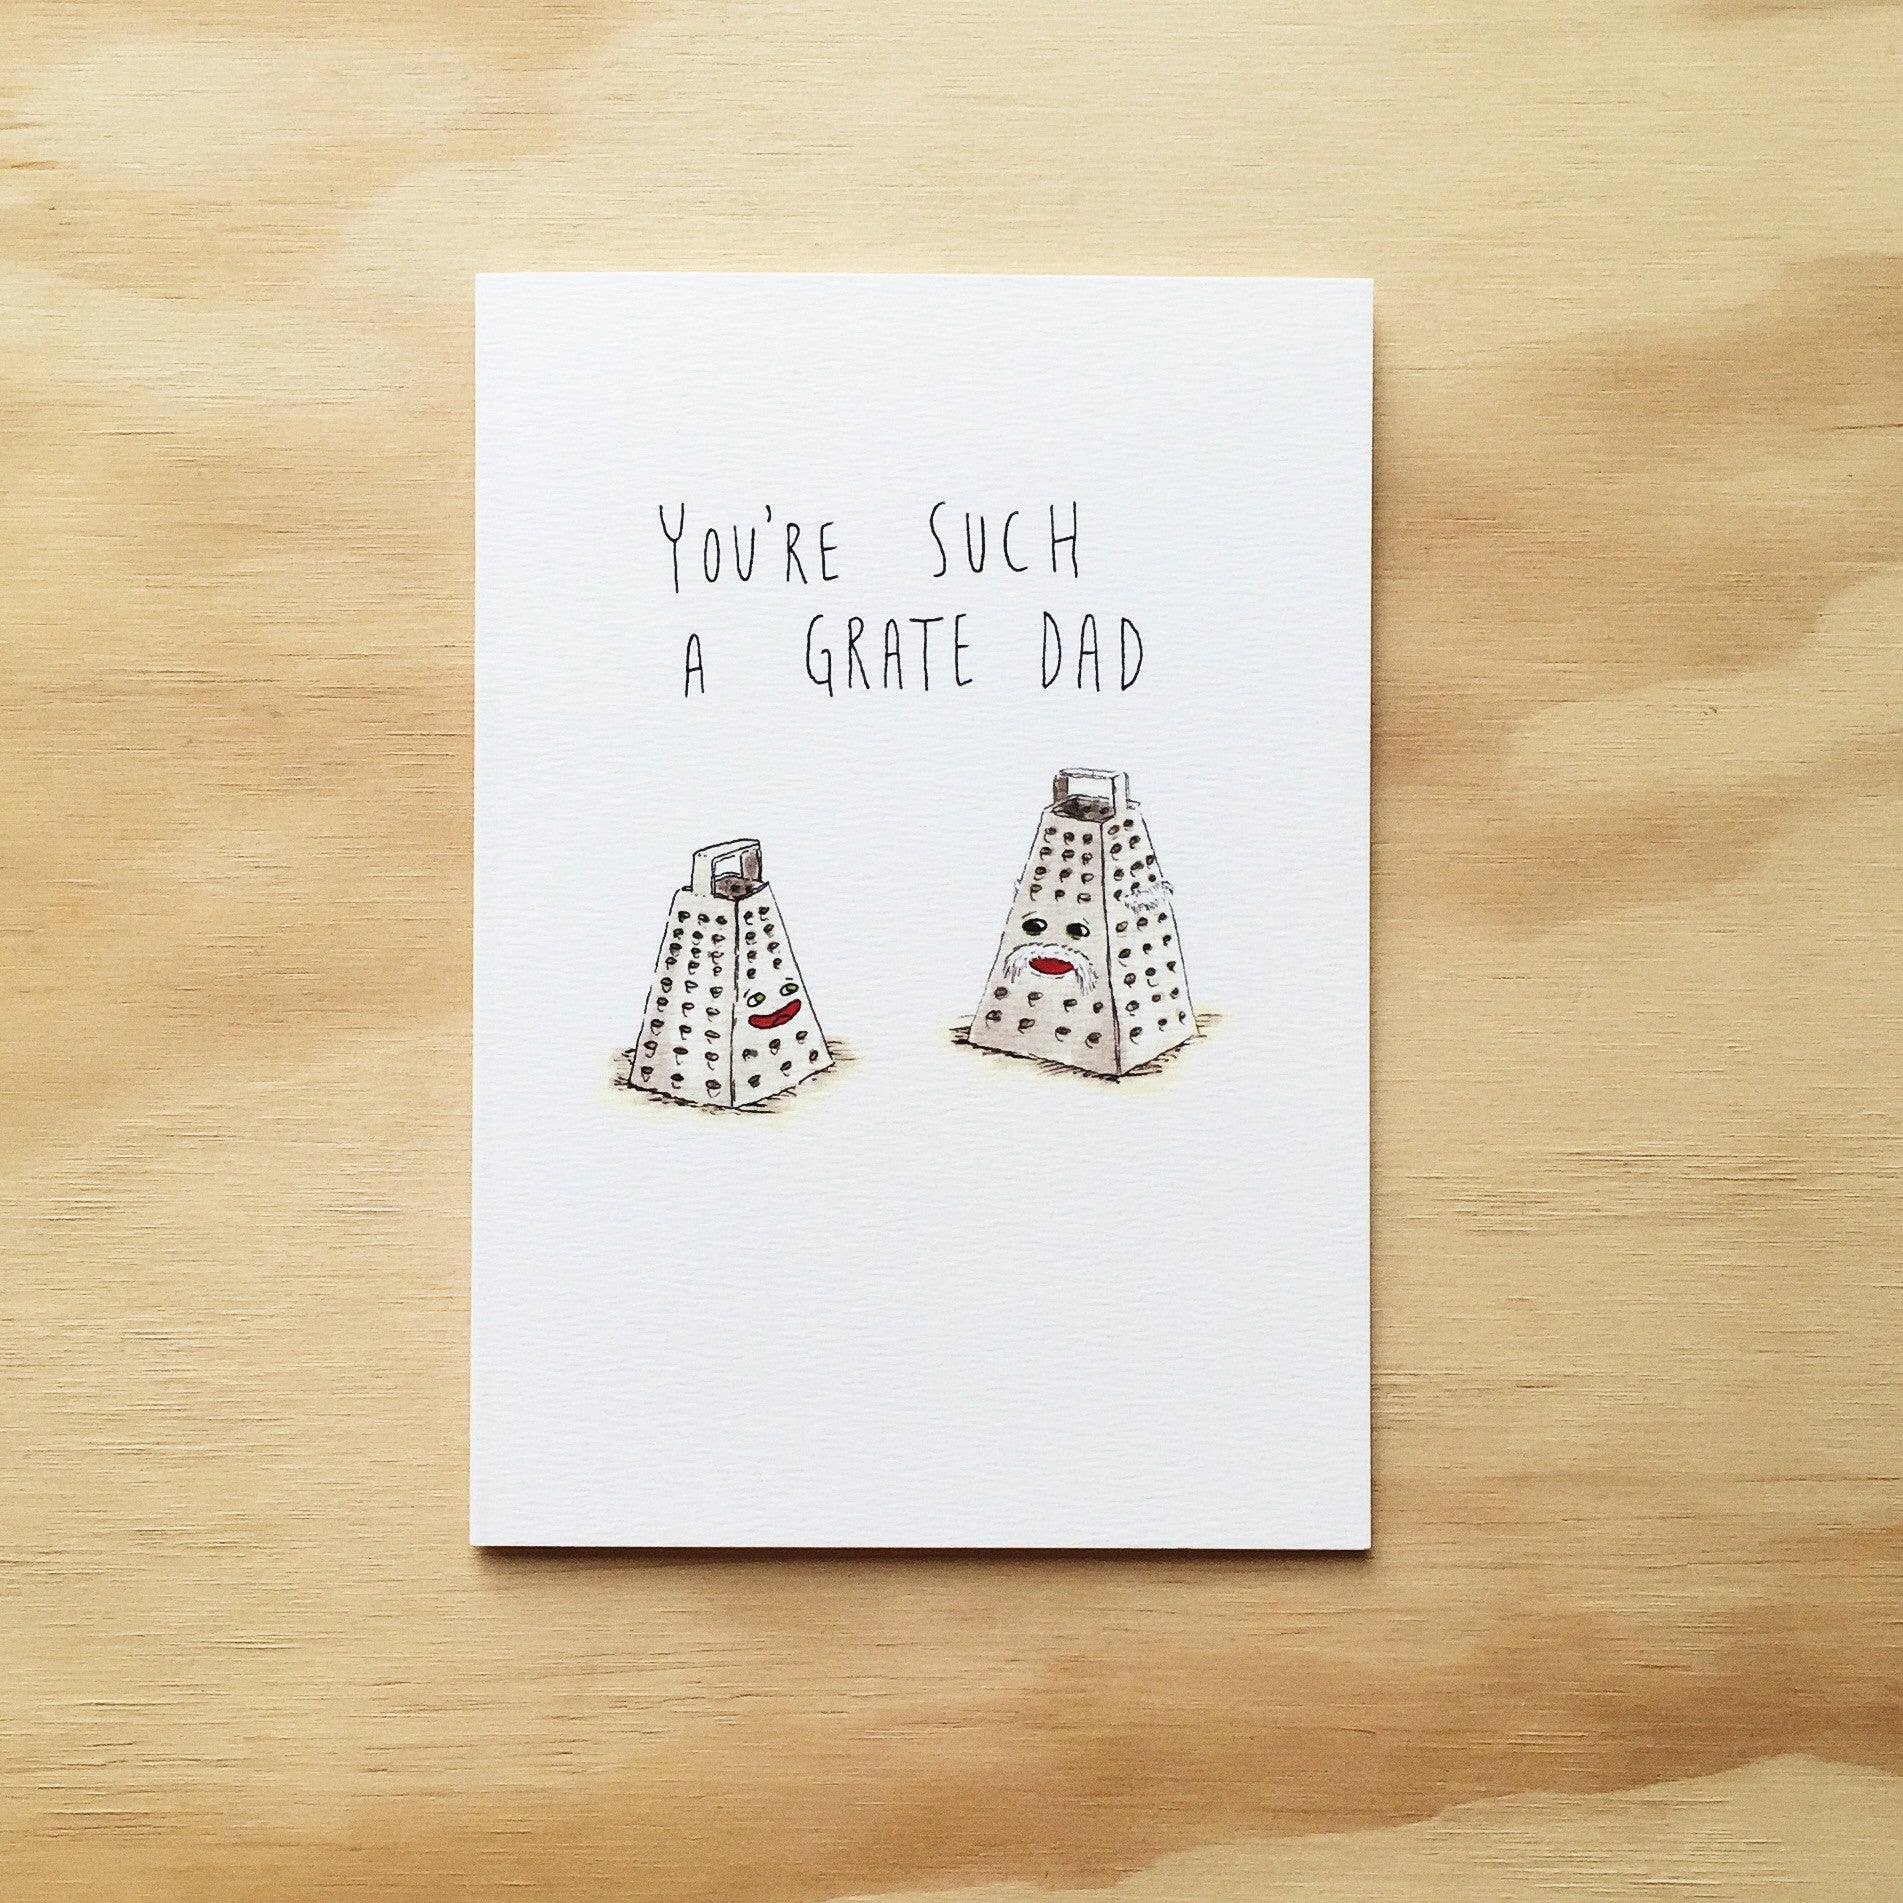 You're Such a Grate Dad - Well Drawn